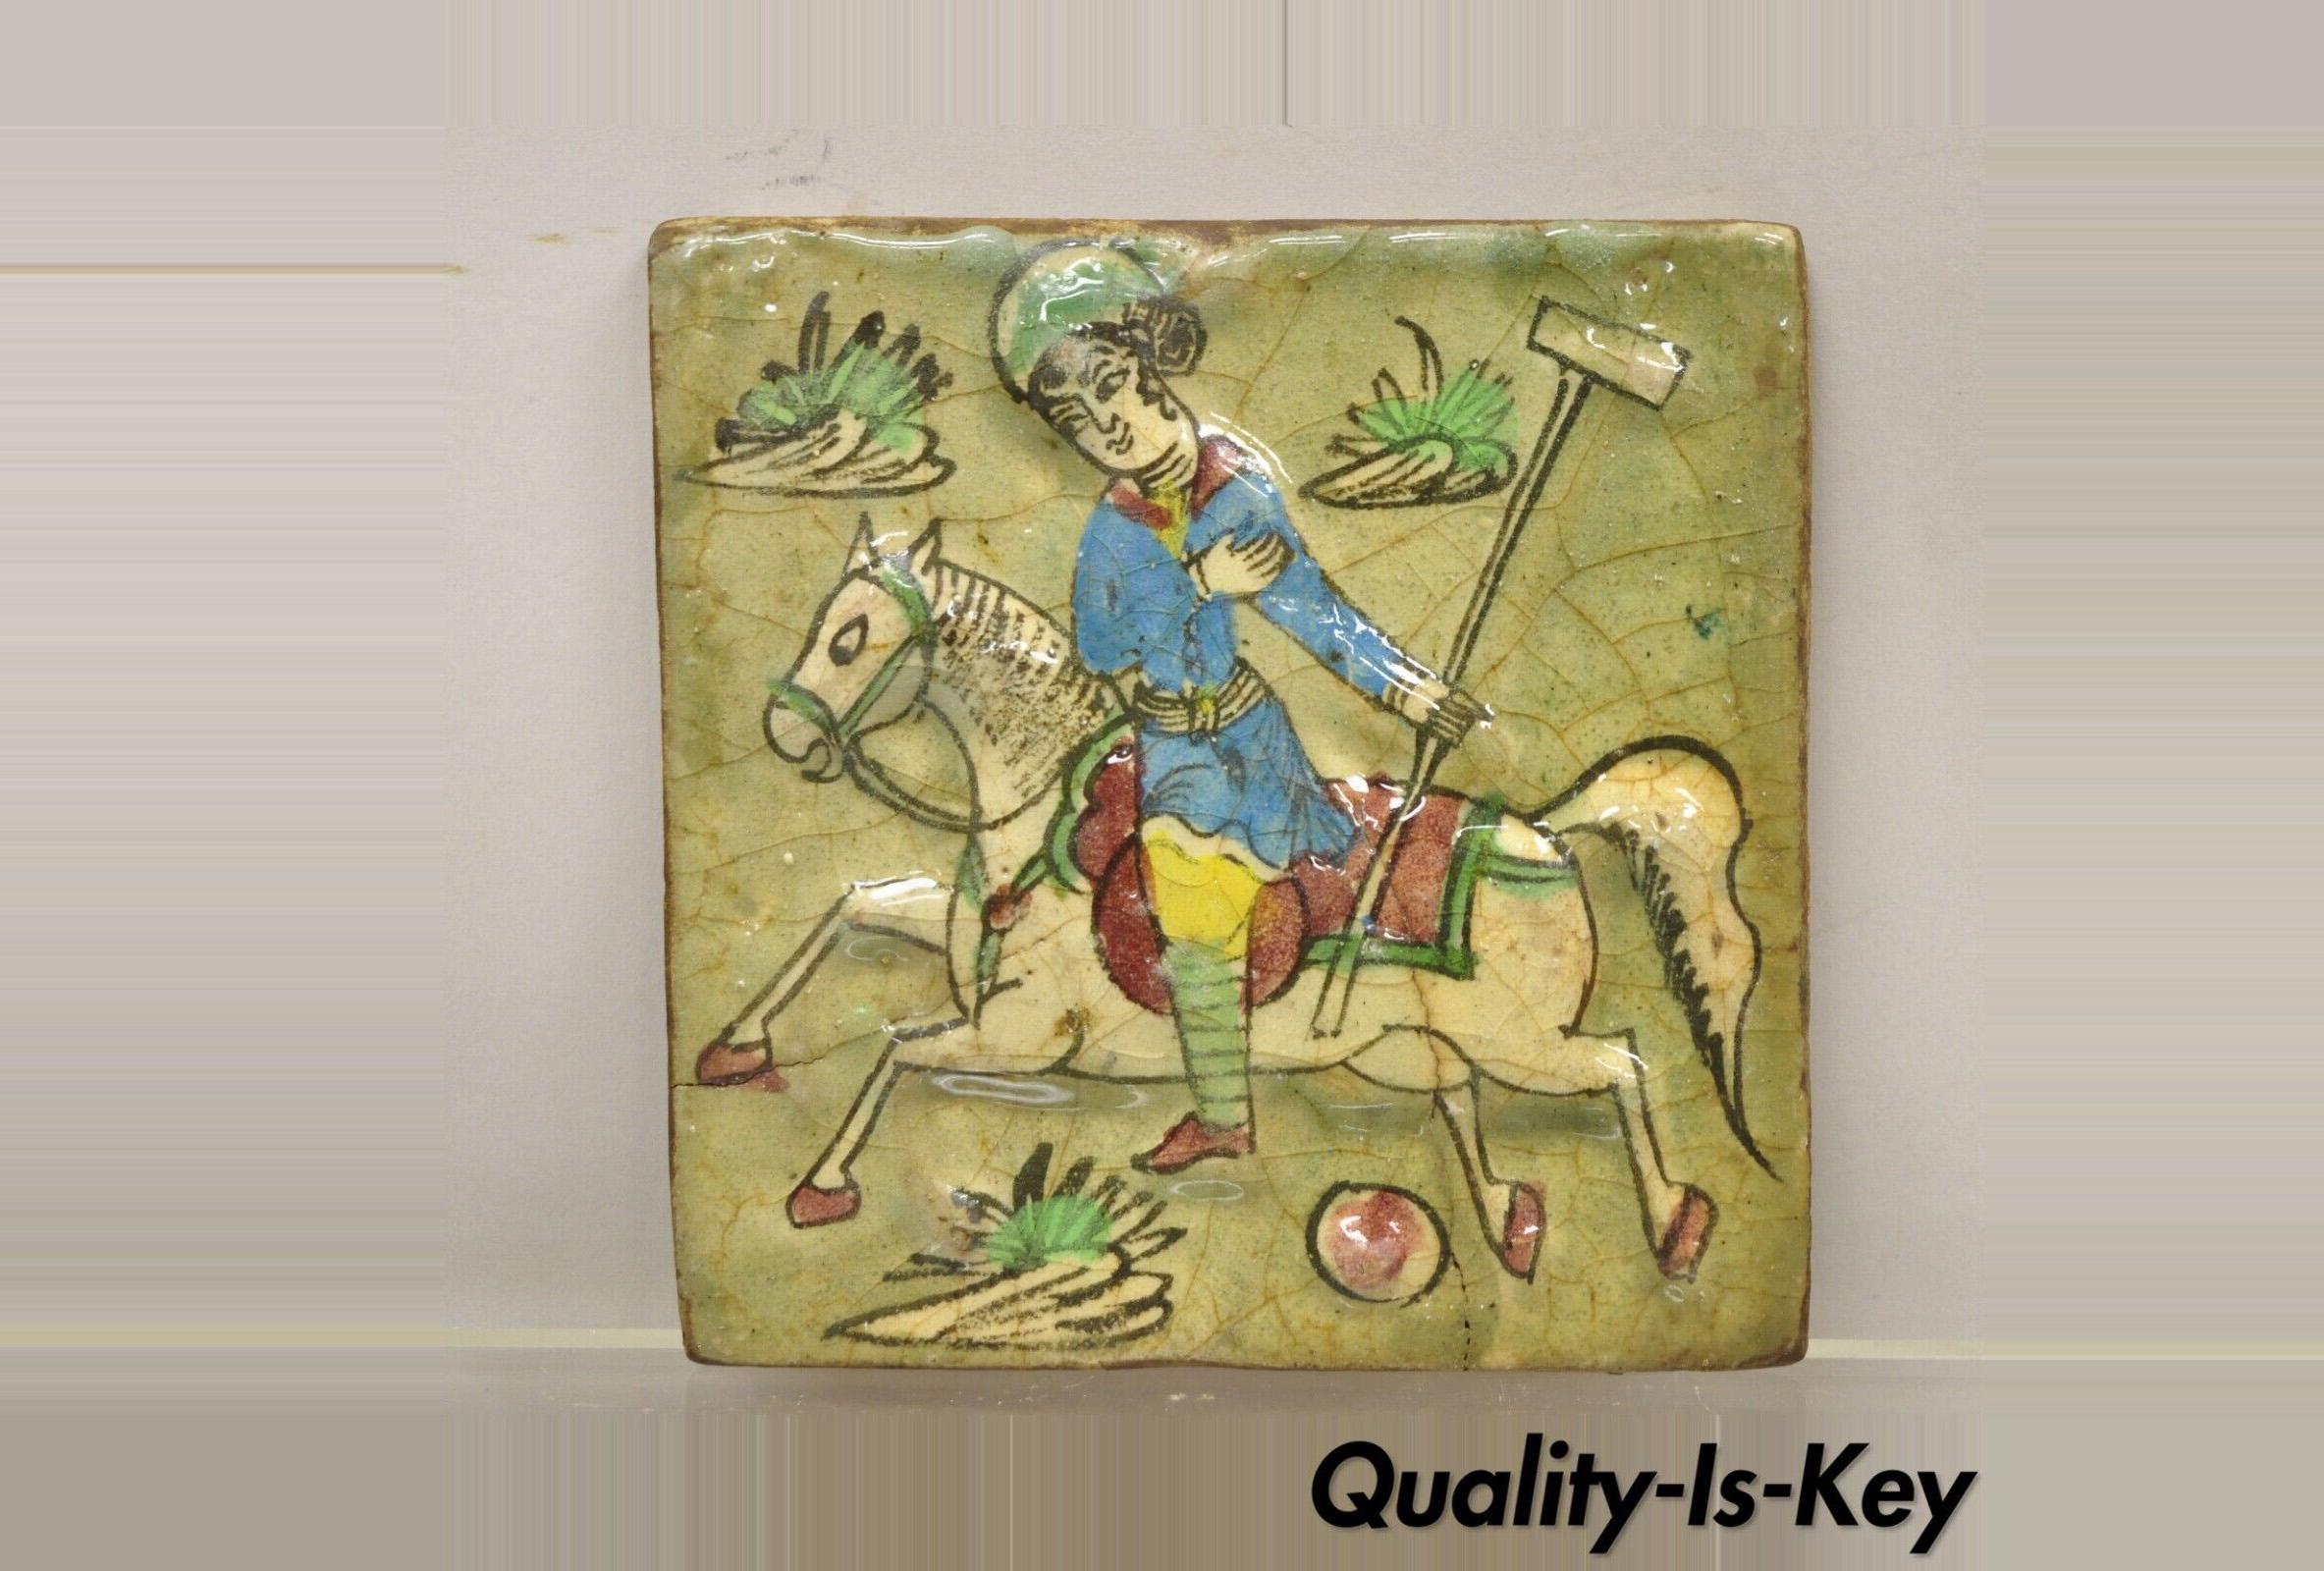 Antique Persian Iznik Qajar style square ceramic pottery tile polo playerr in blue garb on horse C5. Item features original crackle glazed finish, heavy ceramic pottery construction, very impressive detail, wonderful style and form. Great to mount